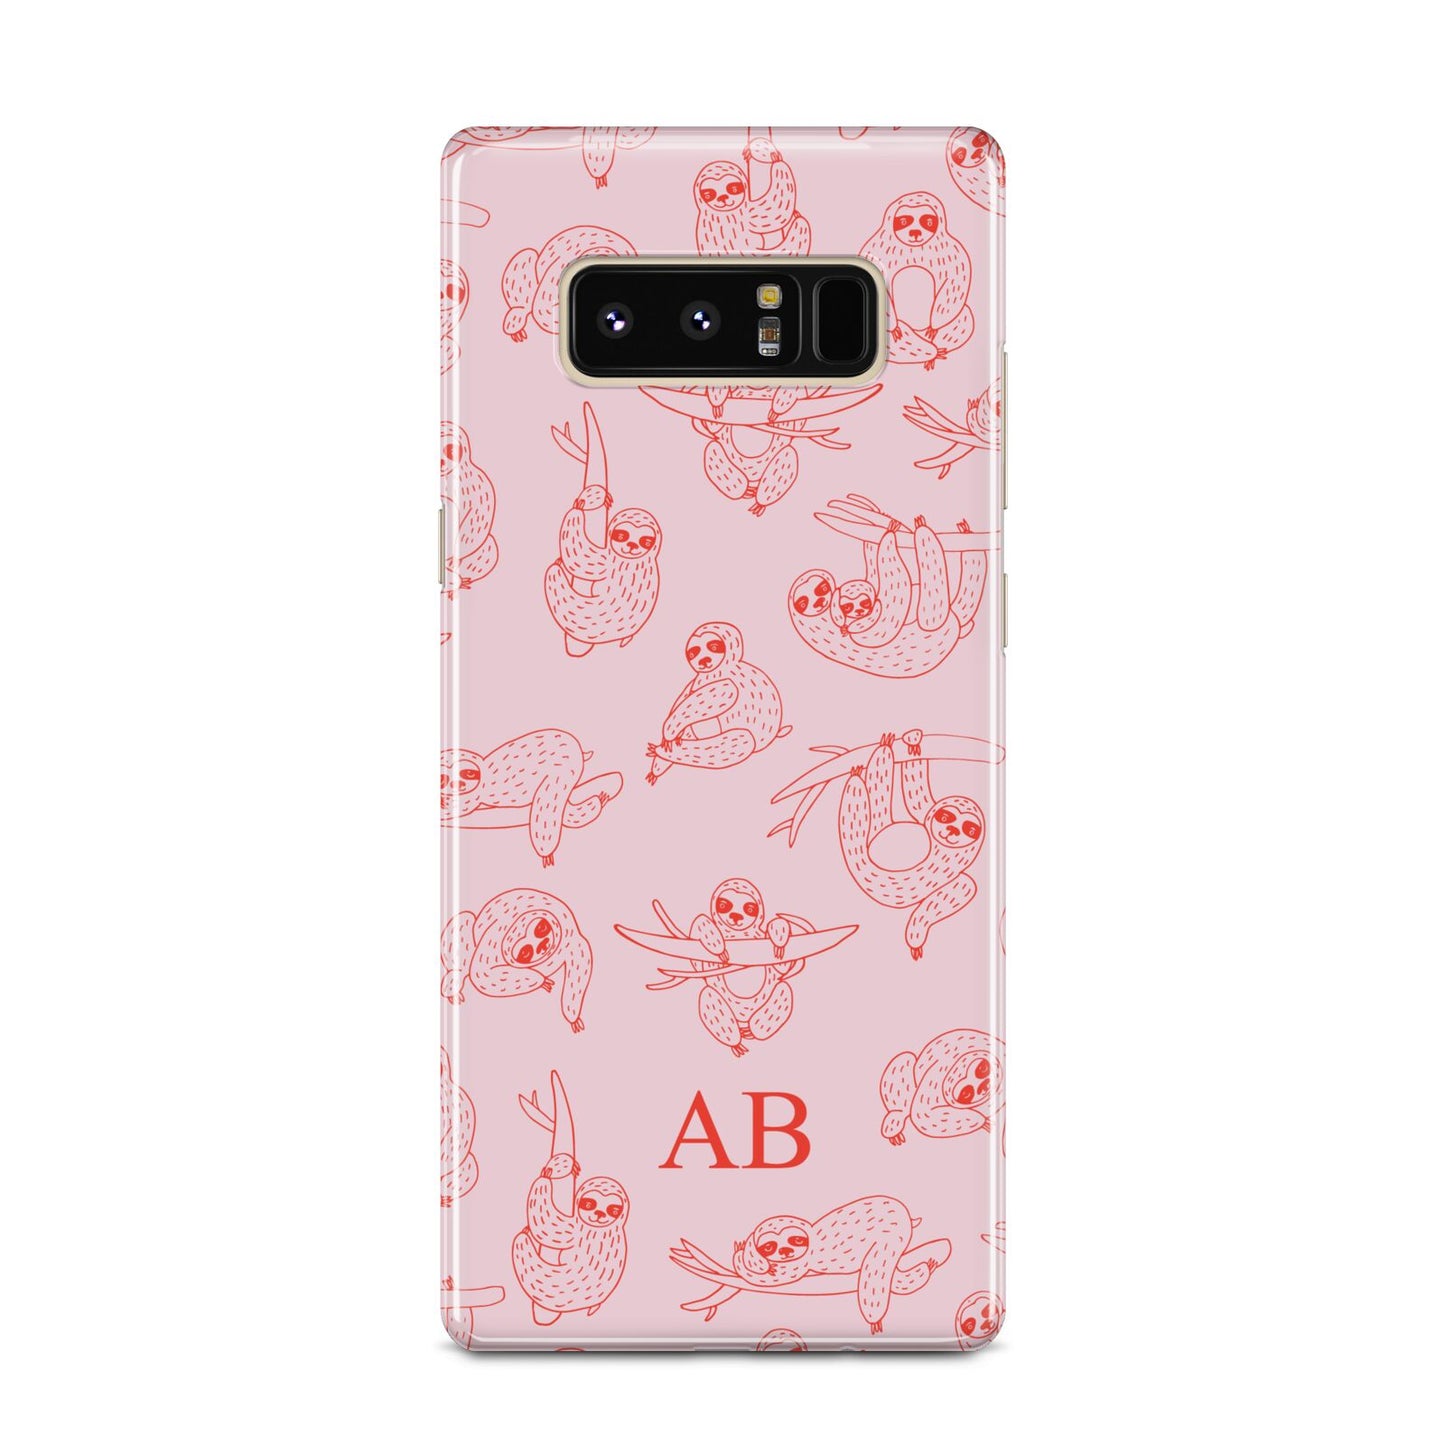 Customised Sloth Samsung Galaxy Note 8 Case